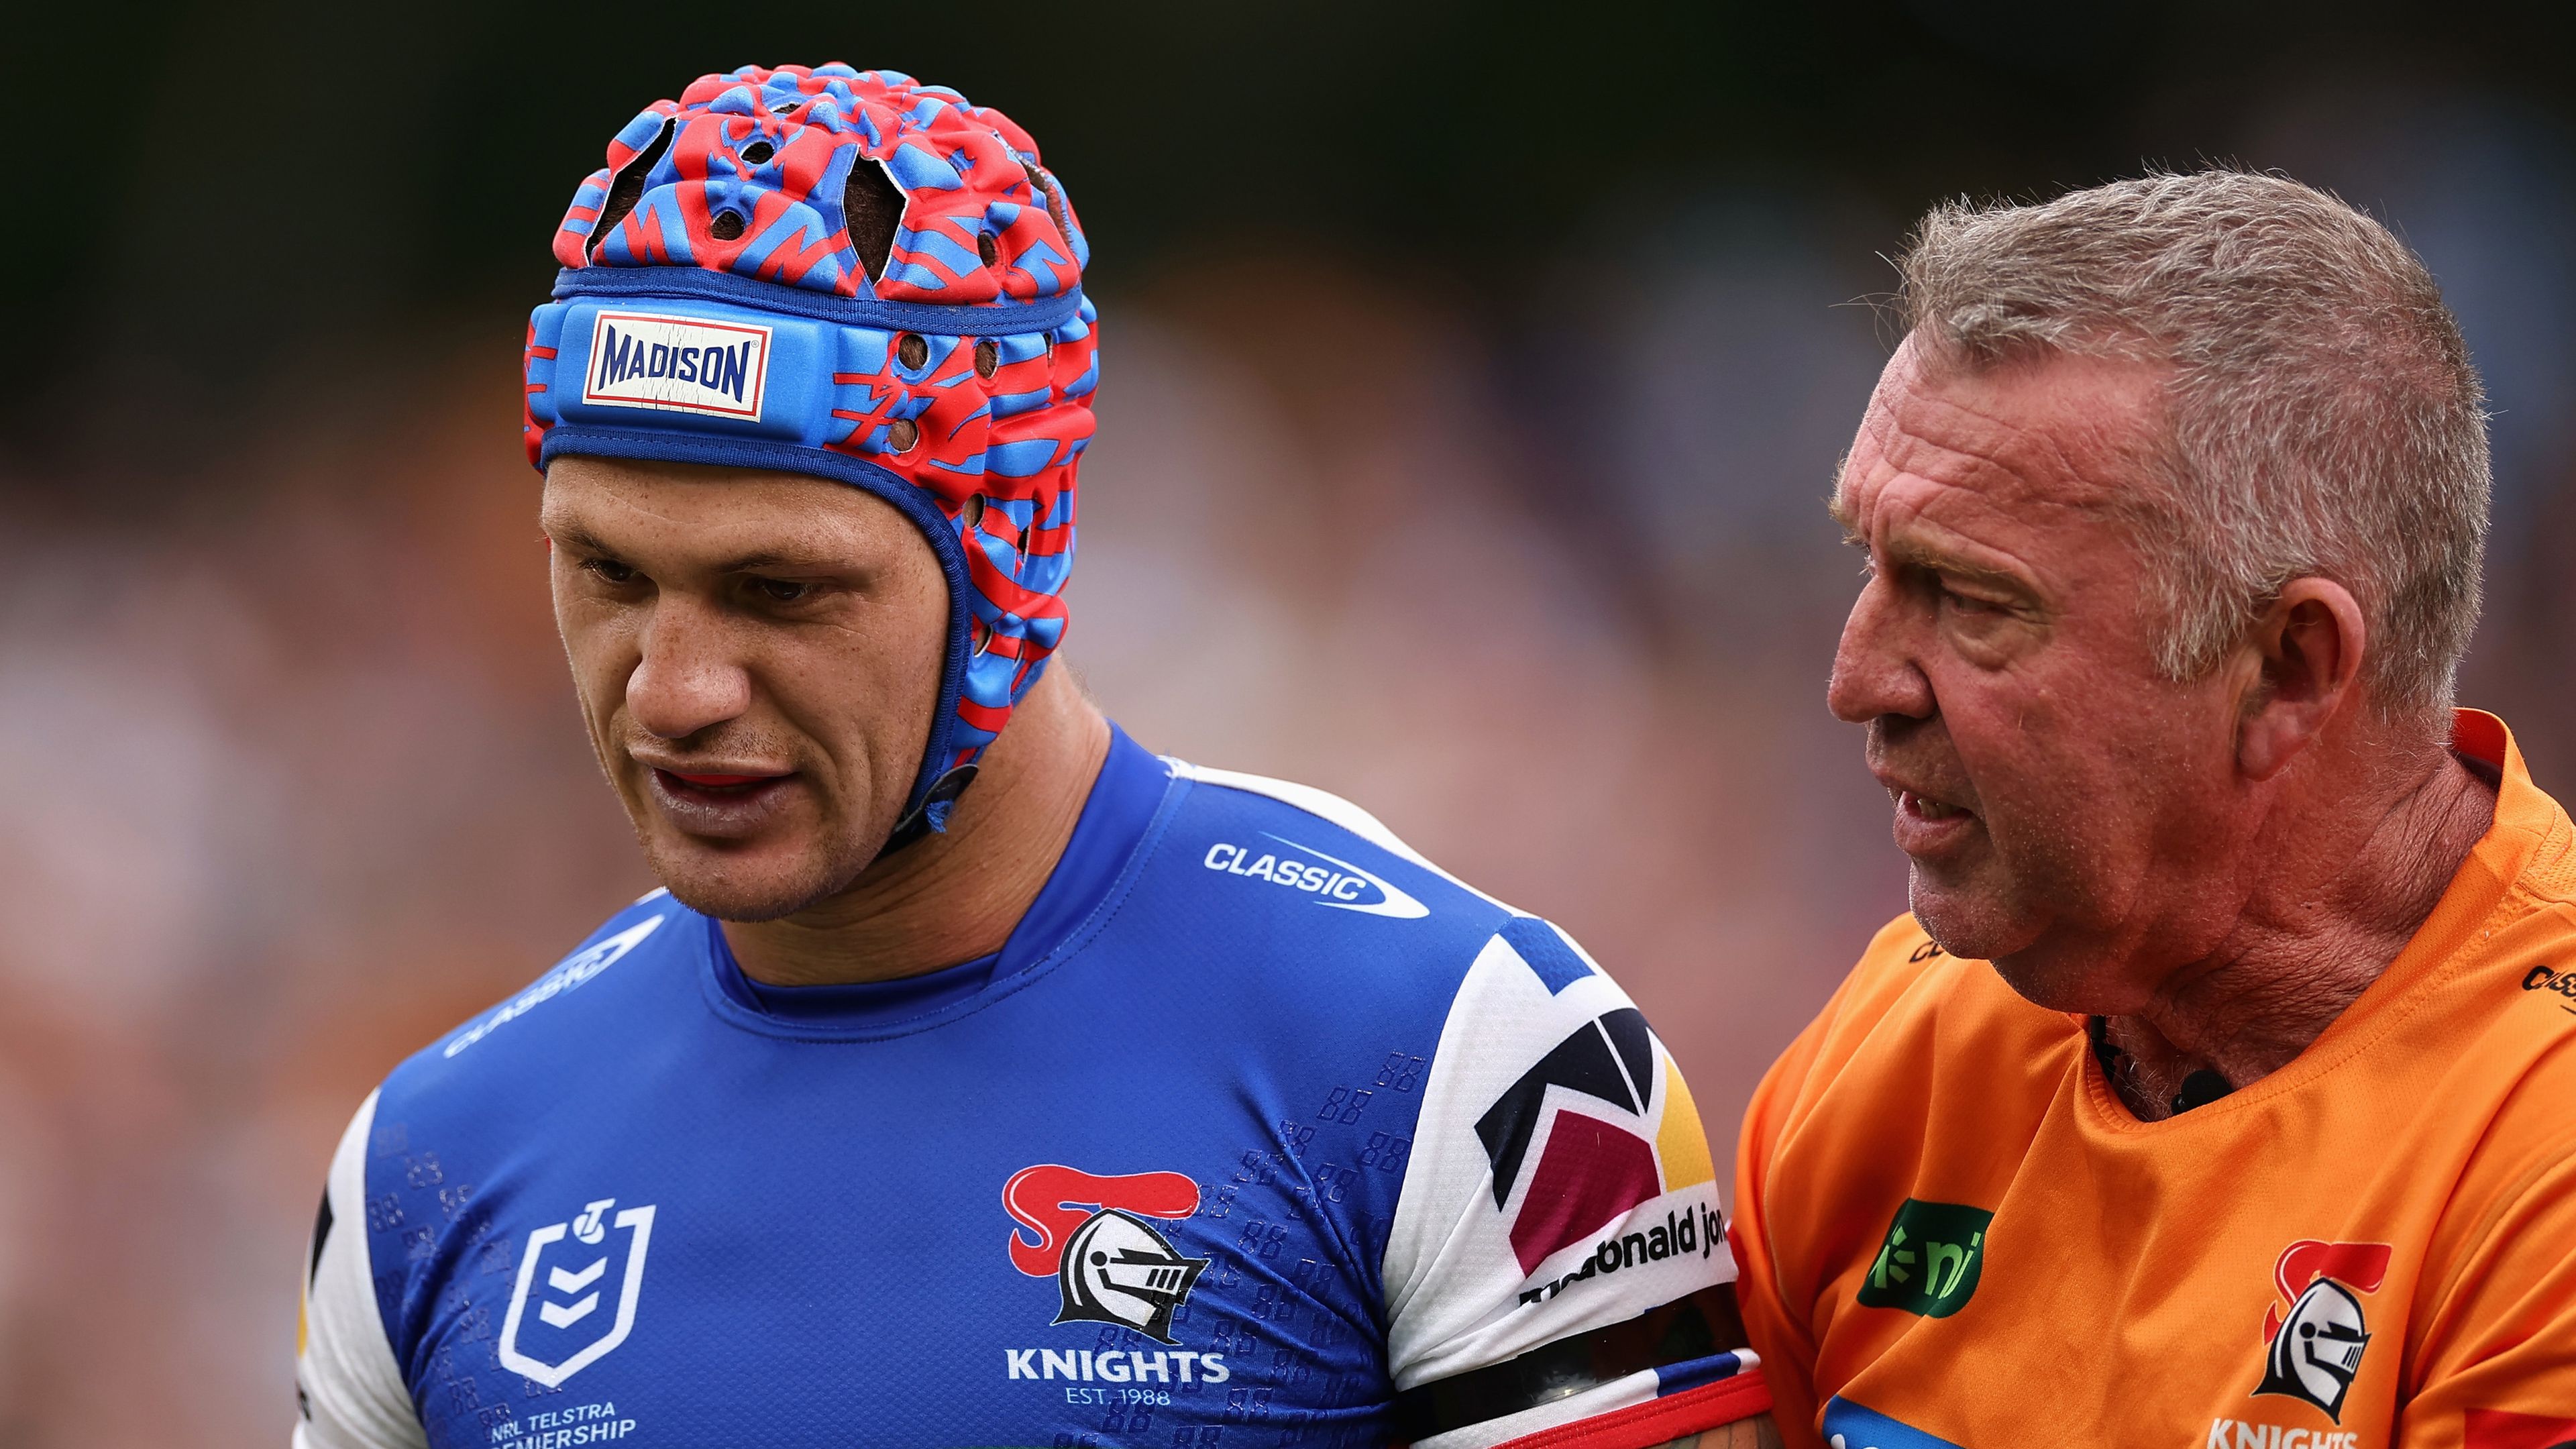 Kalyn Ponga admits to retirement fears before 'six-minute test' revived hopes of resuming career